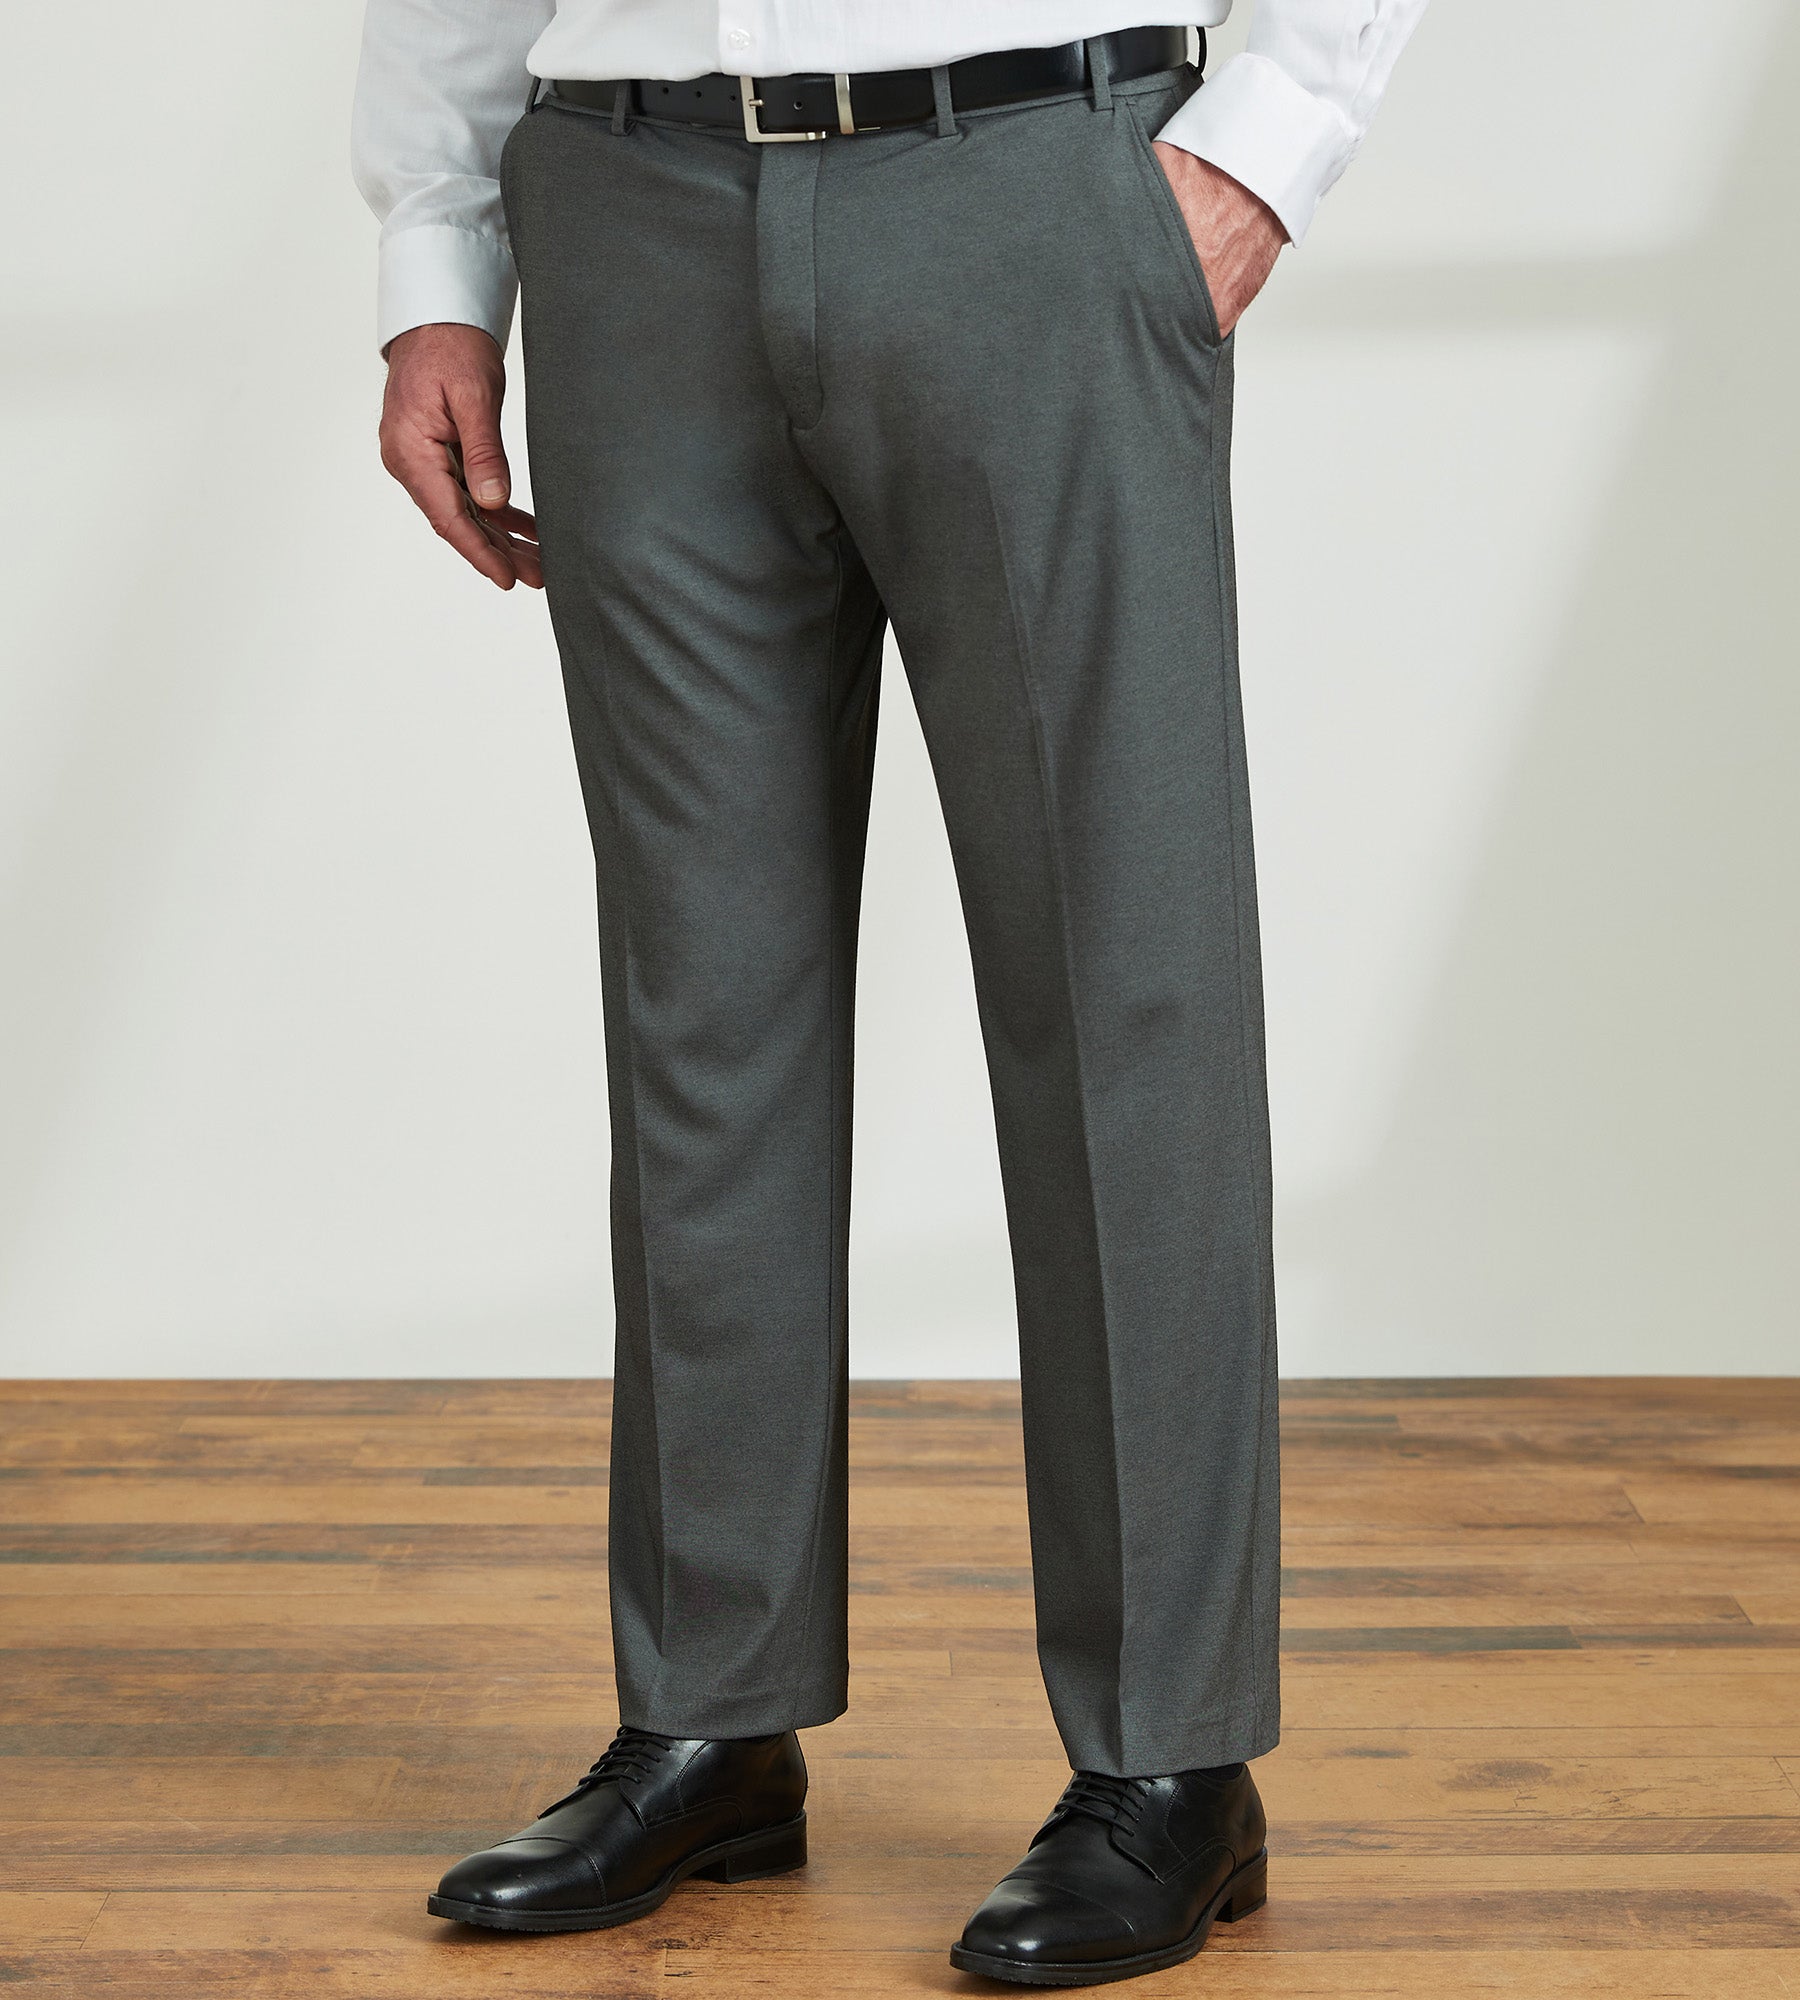 Relaxed fit: stretch cotton trousers - dark grey